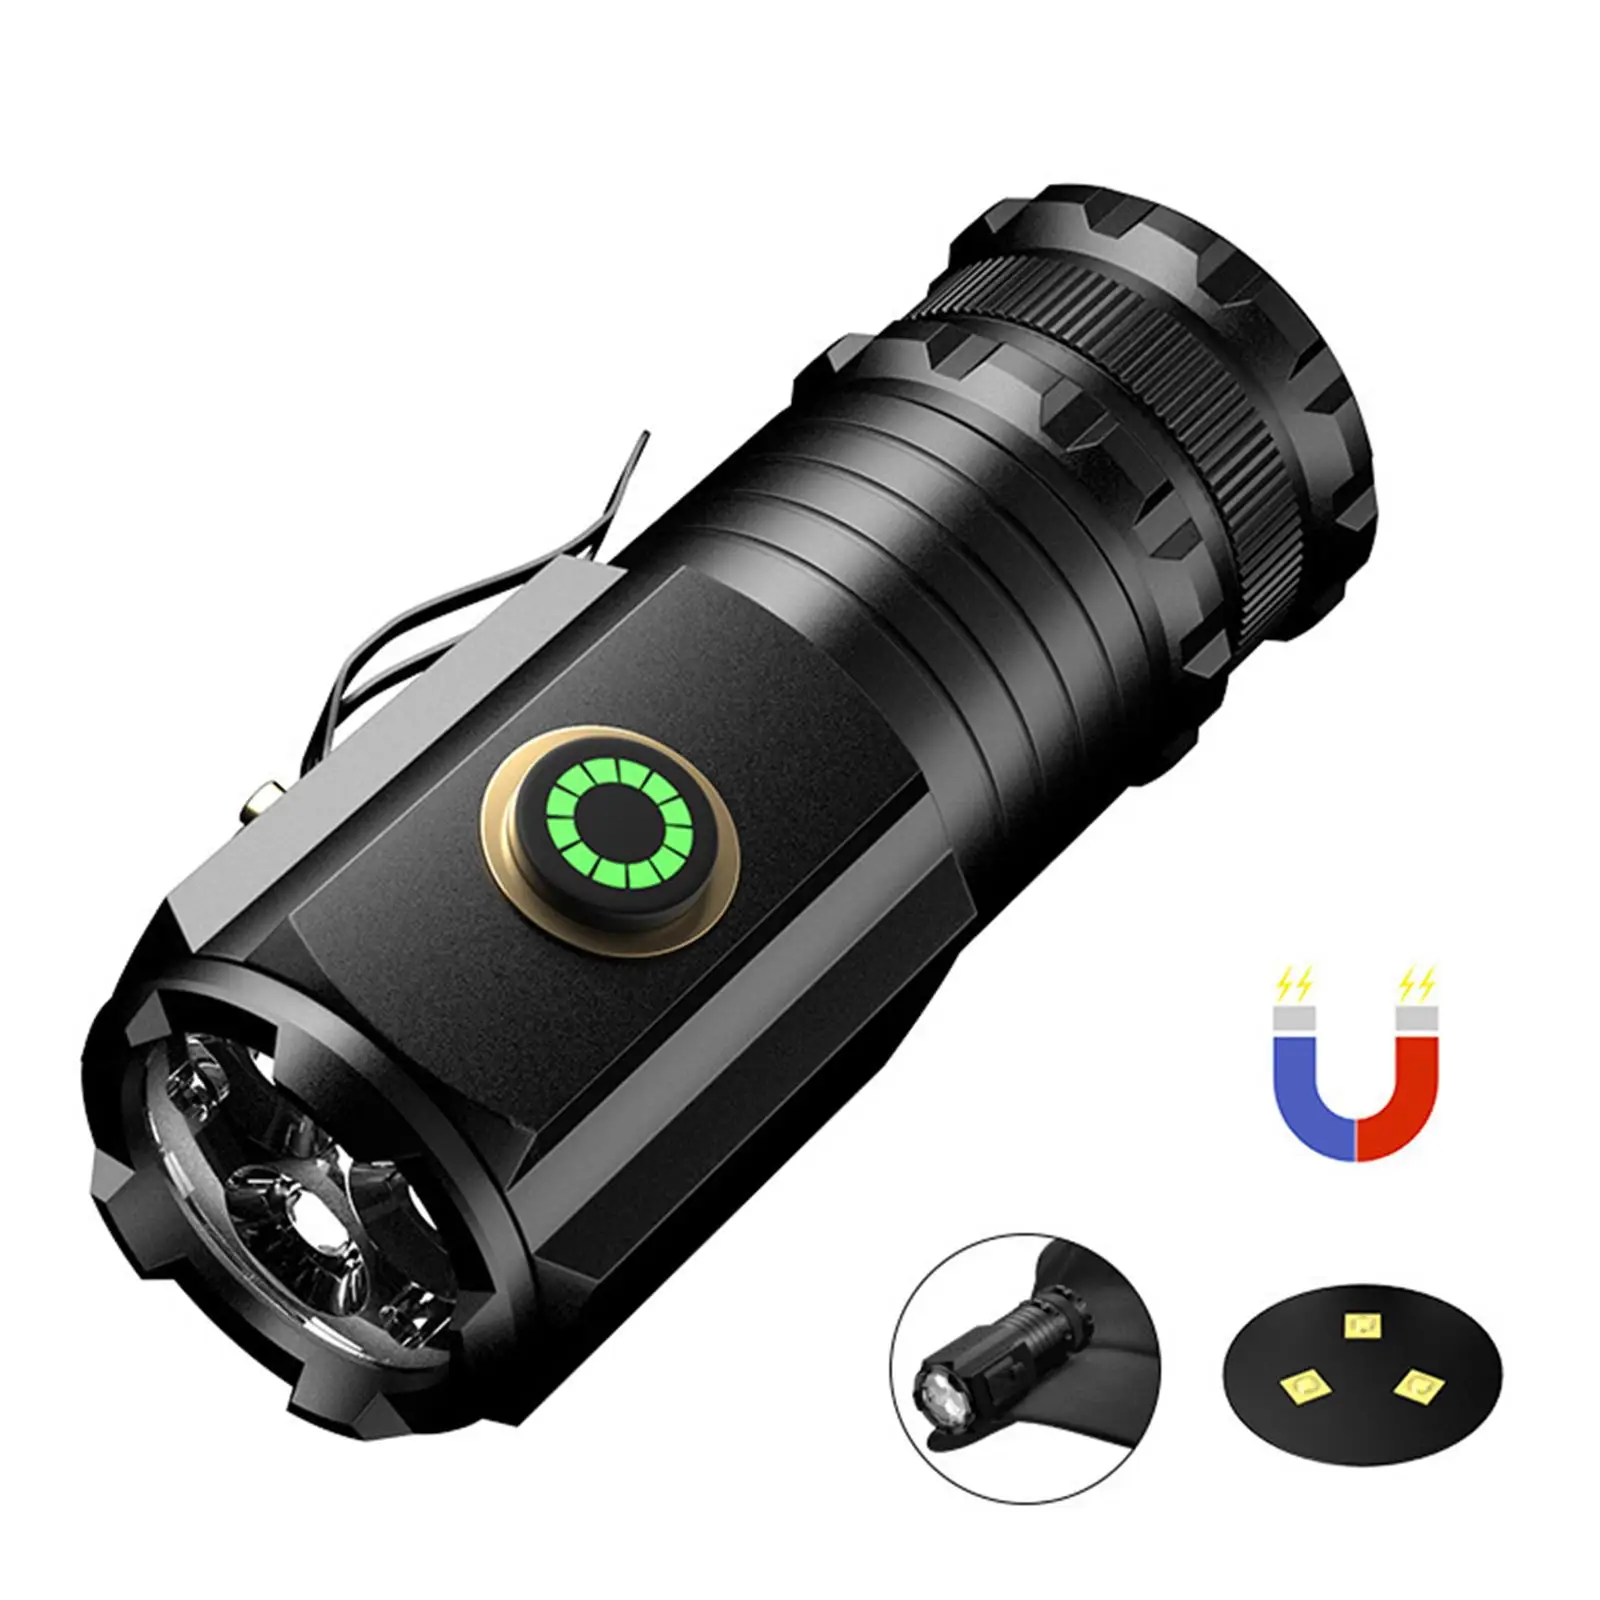 Portable flashlights 5 Modes 2000Lumens Rechargeable Handheld Torch Lights for Car Garage Emergency Survival Outdoor Fishing